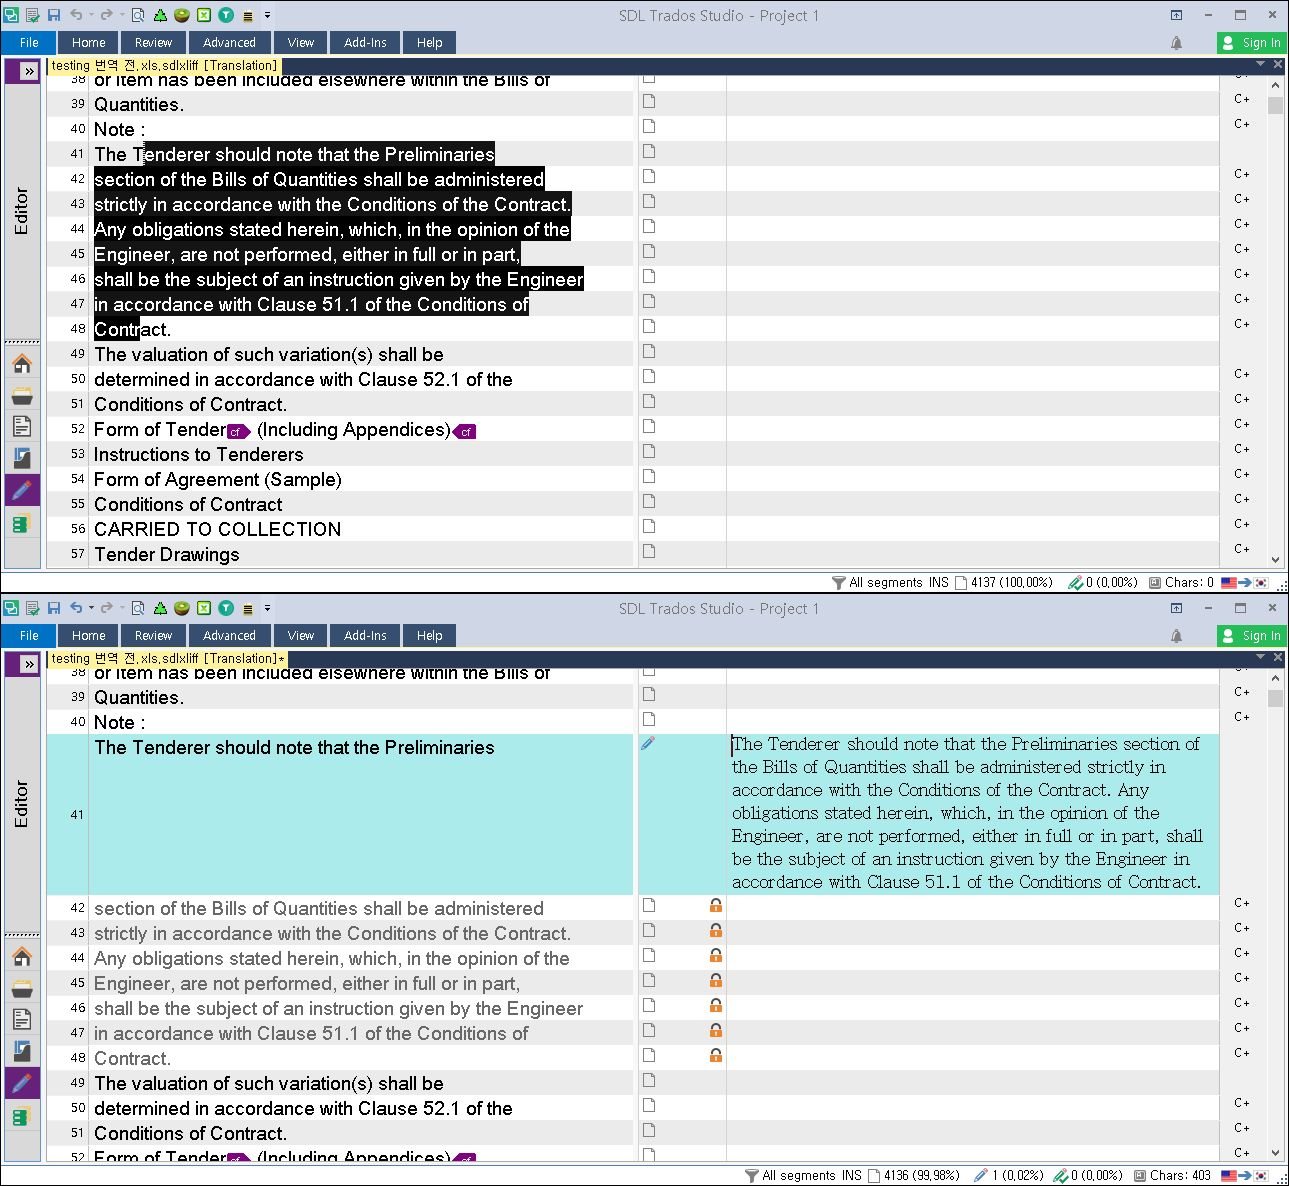 Screenshot of Trados Studio interface showing a translation project with highlighted text segments in the Editor pane.